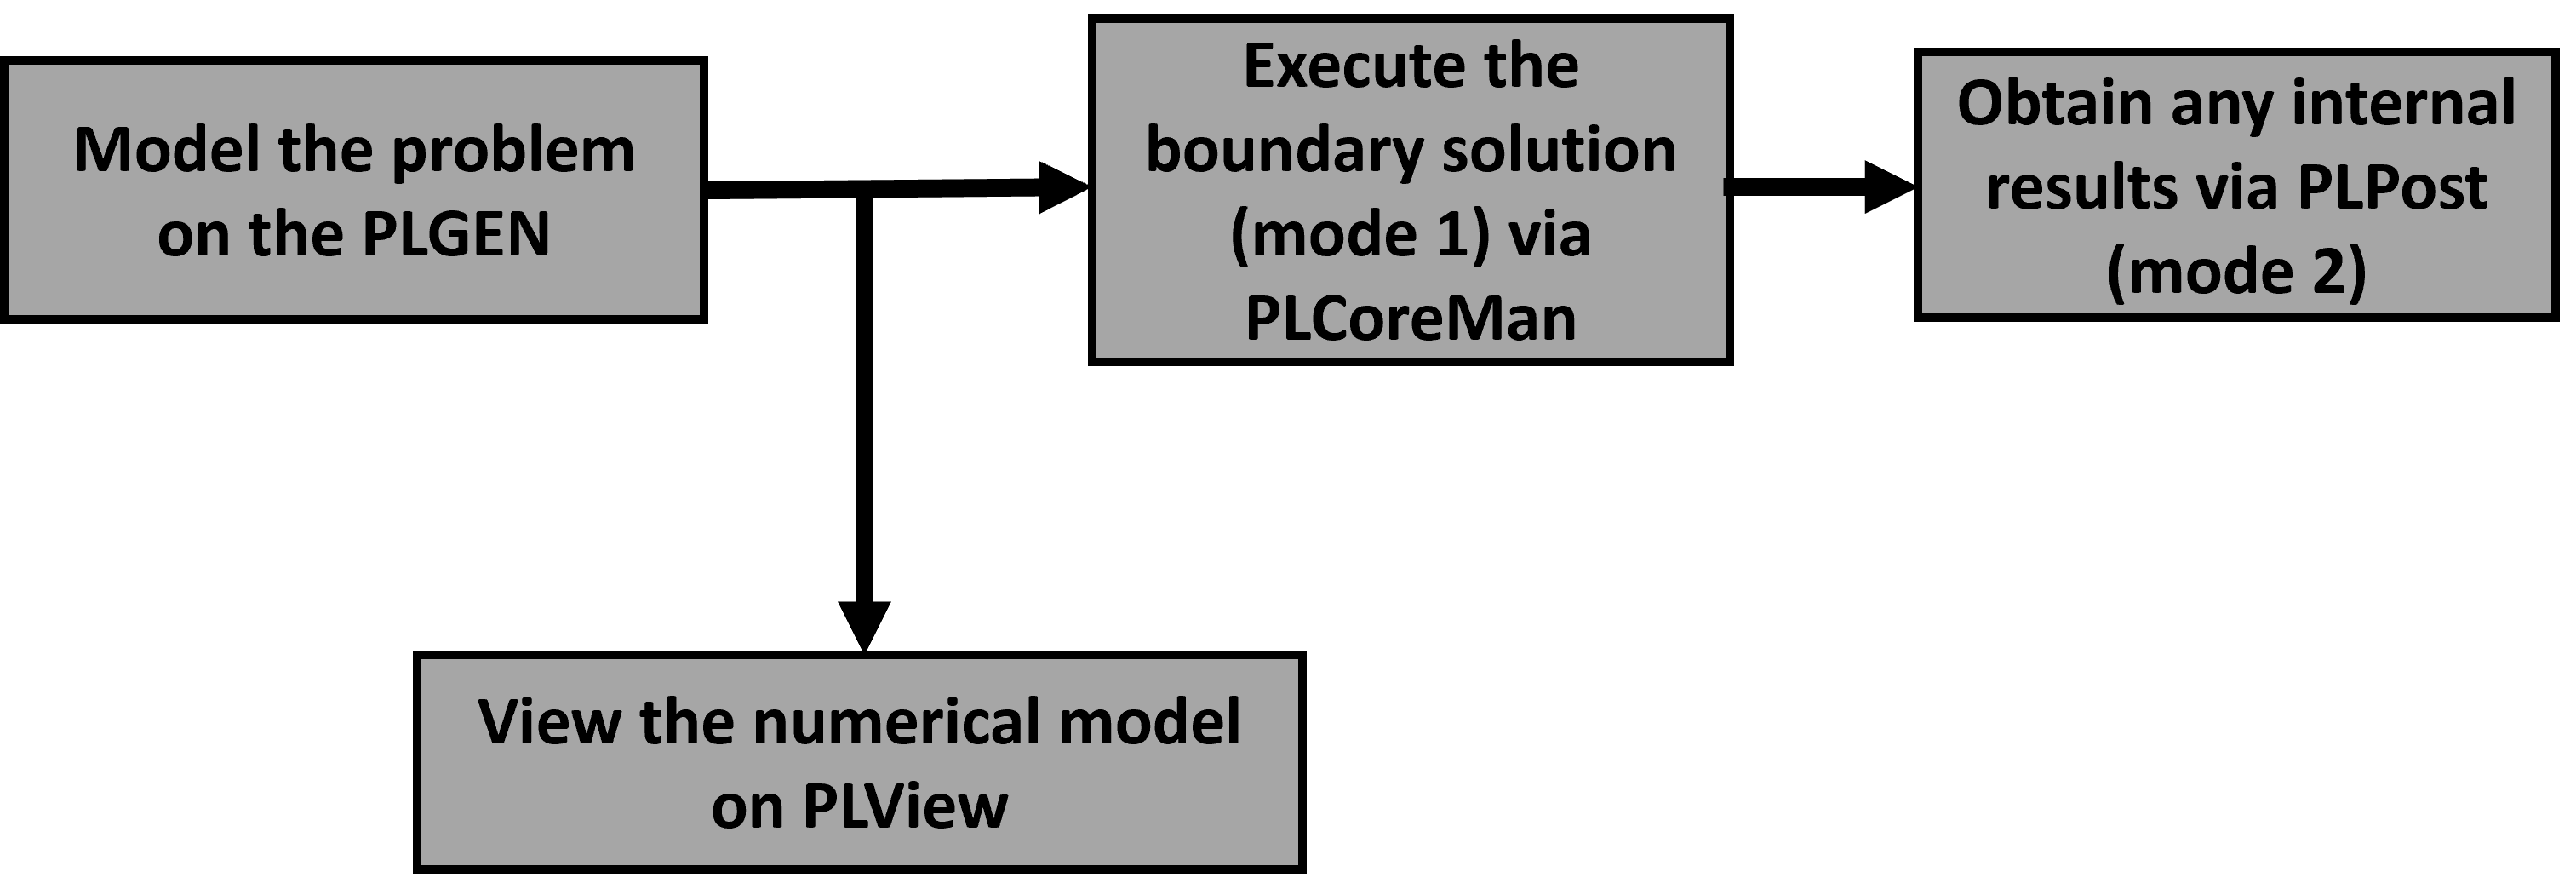 Solution modes